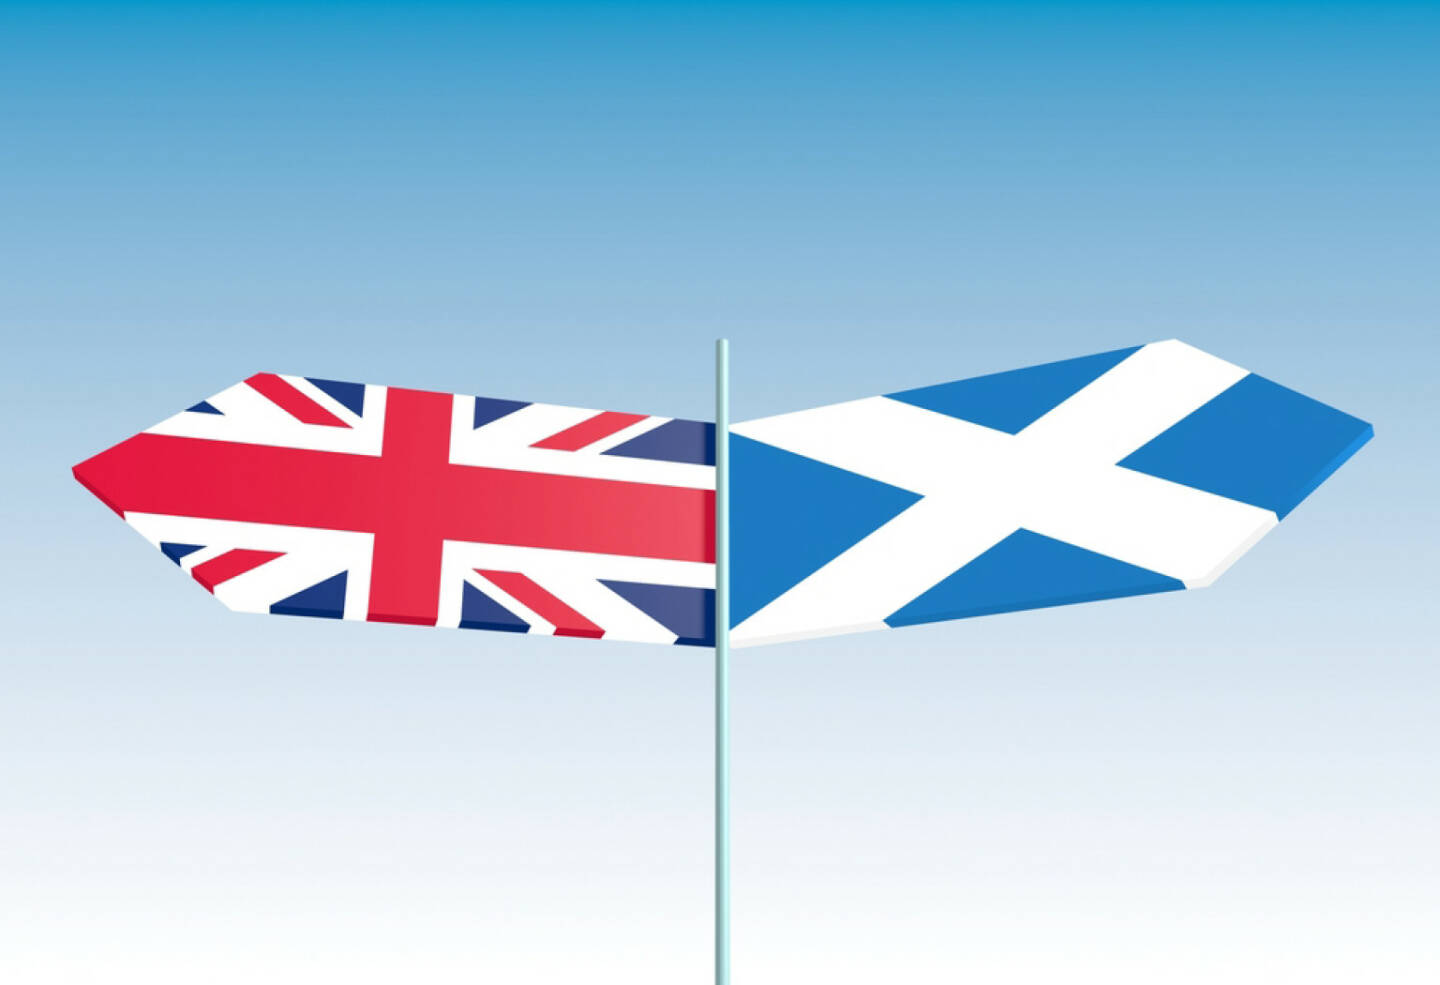 Schottland, Flagge, Großbritanien, England, http://www.shutterstock.com/de/pic-216277471/stock-photo-scotland-vote-for-independence-politic-relative-background-with-national-flags.html